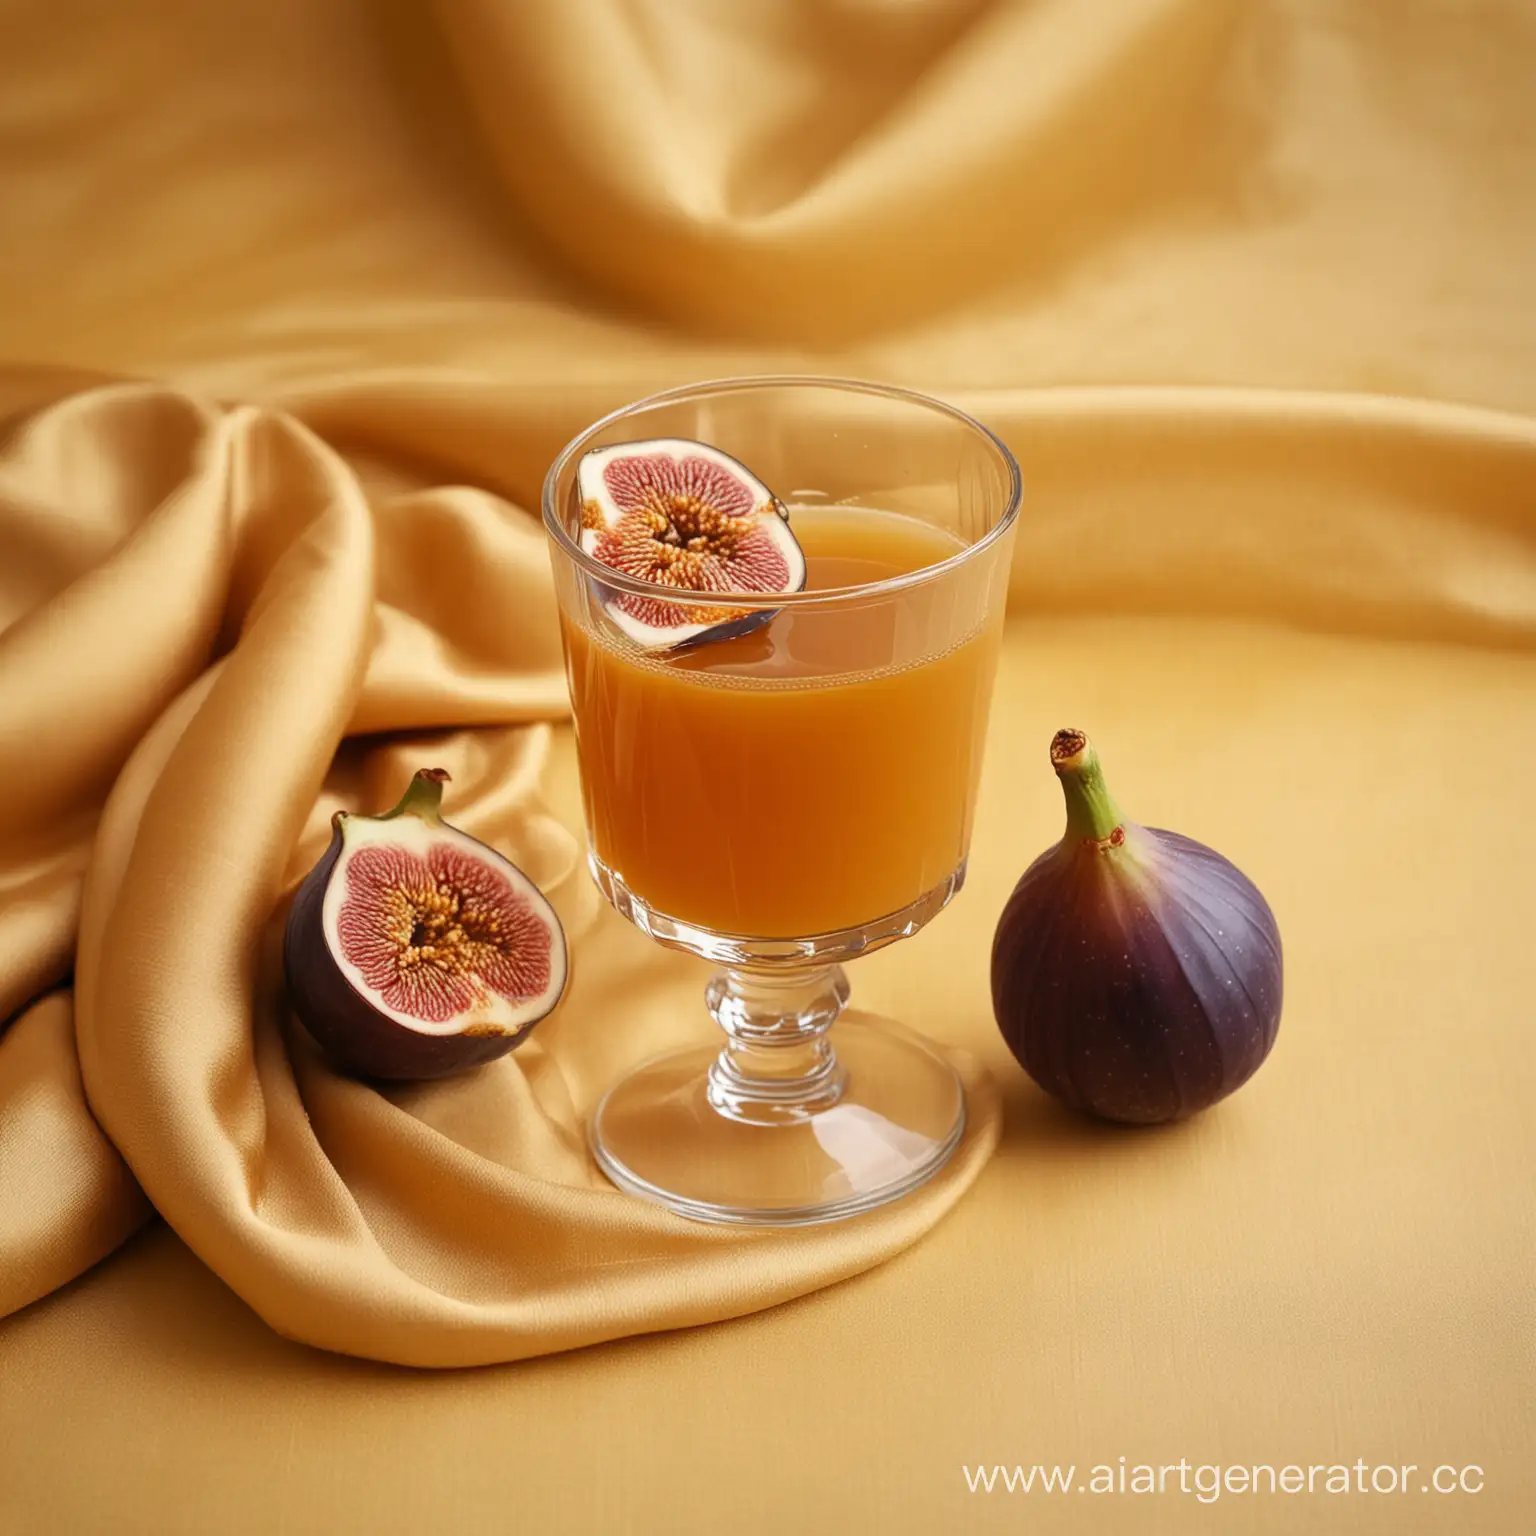 Ripe-Fig-with-Juice-in-Classic-Glass-on-Luxurious-Silk-Cloth-Background